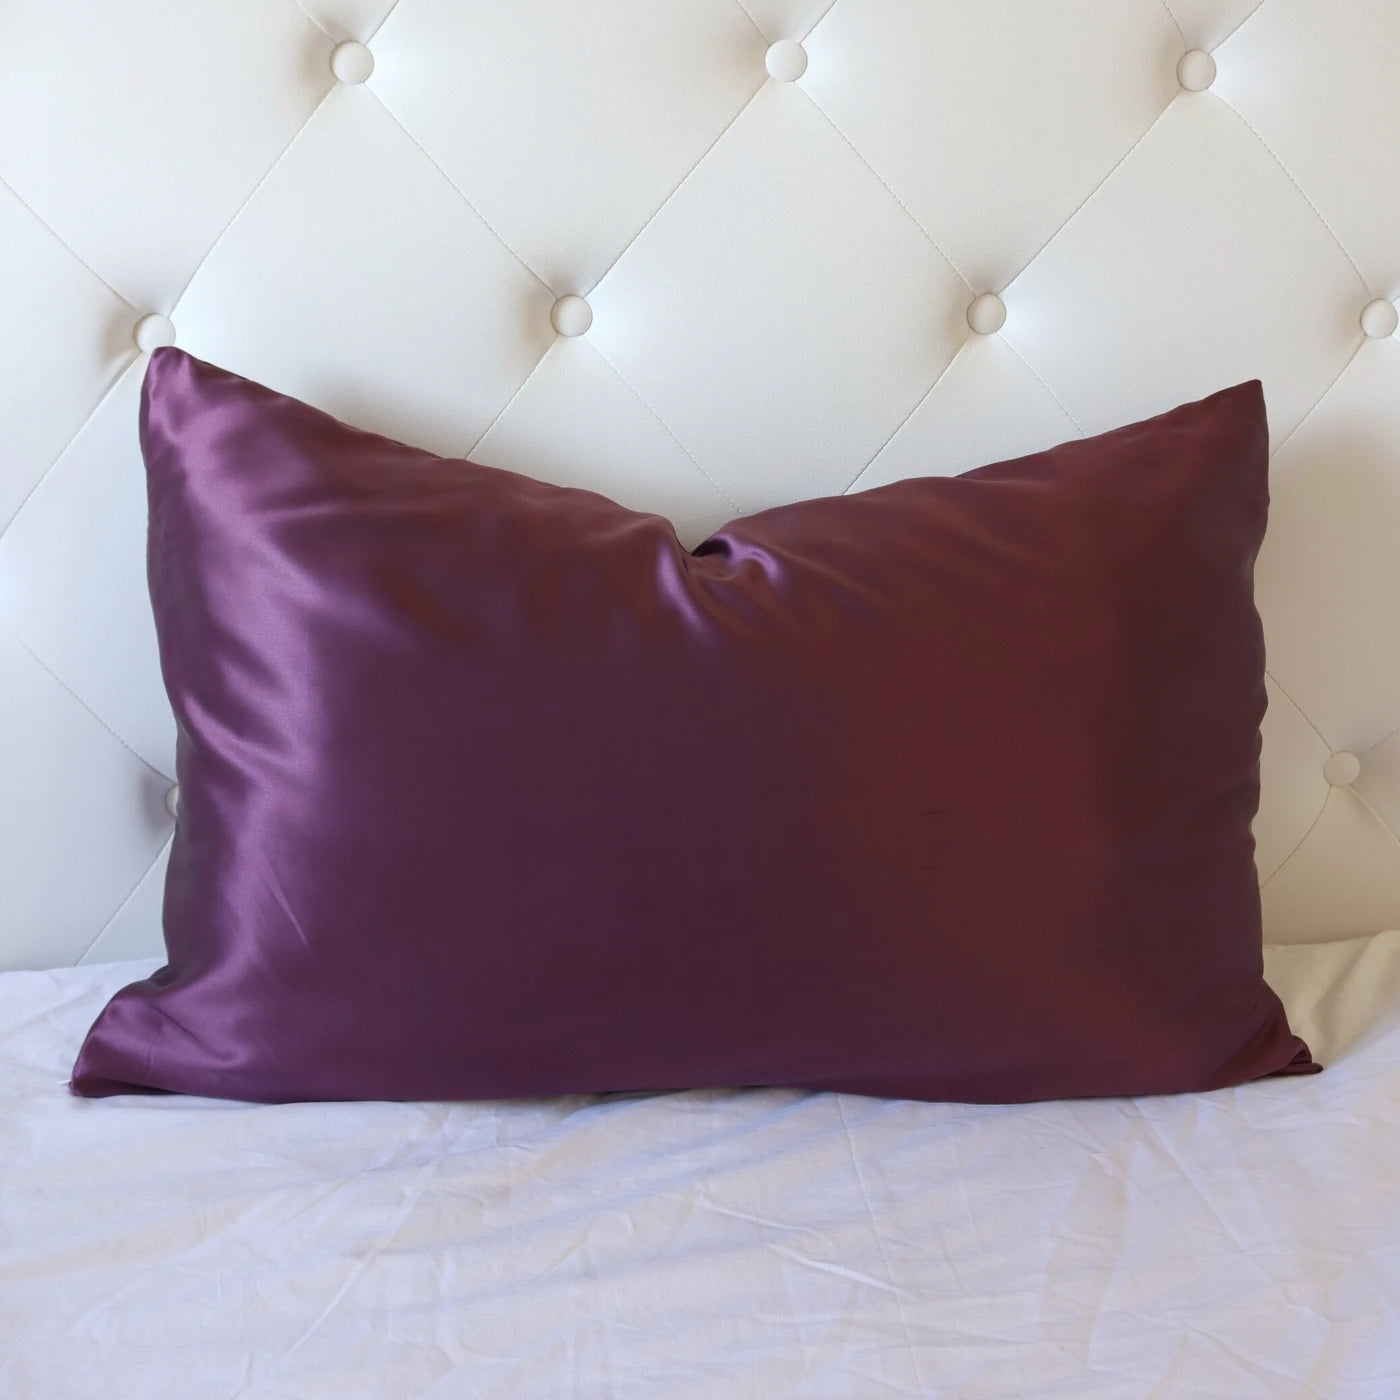 100% Real Mulberry Silk Pillowcase With Zipper 22 Momme 6A Grade Highest quality luxury silk pillows UK USA ES CA queen king standard purple dark red cherry wine